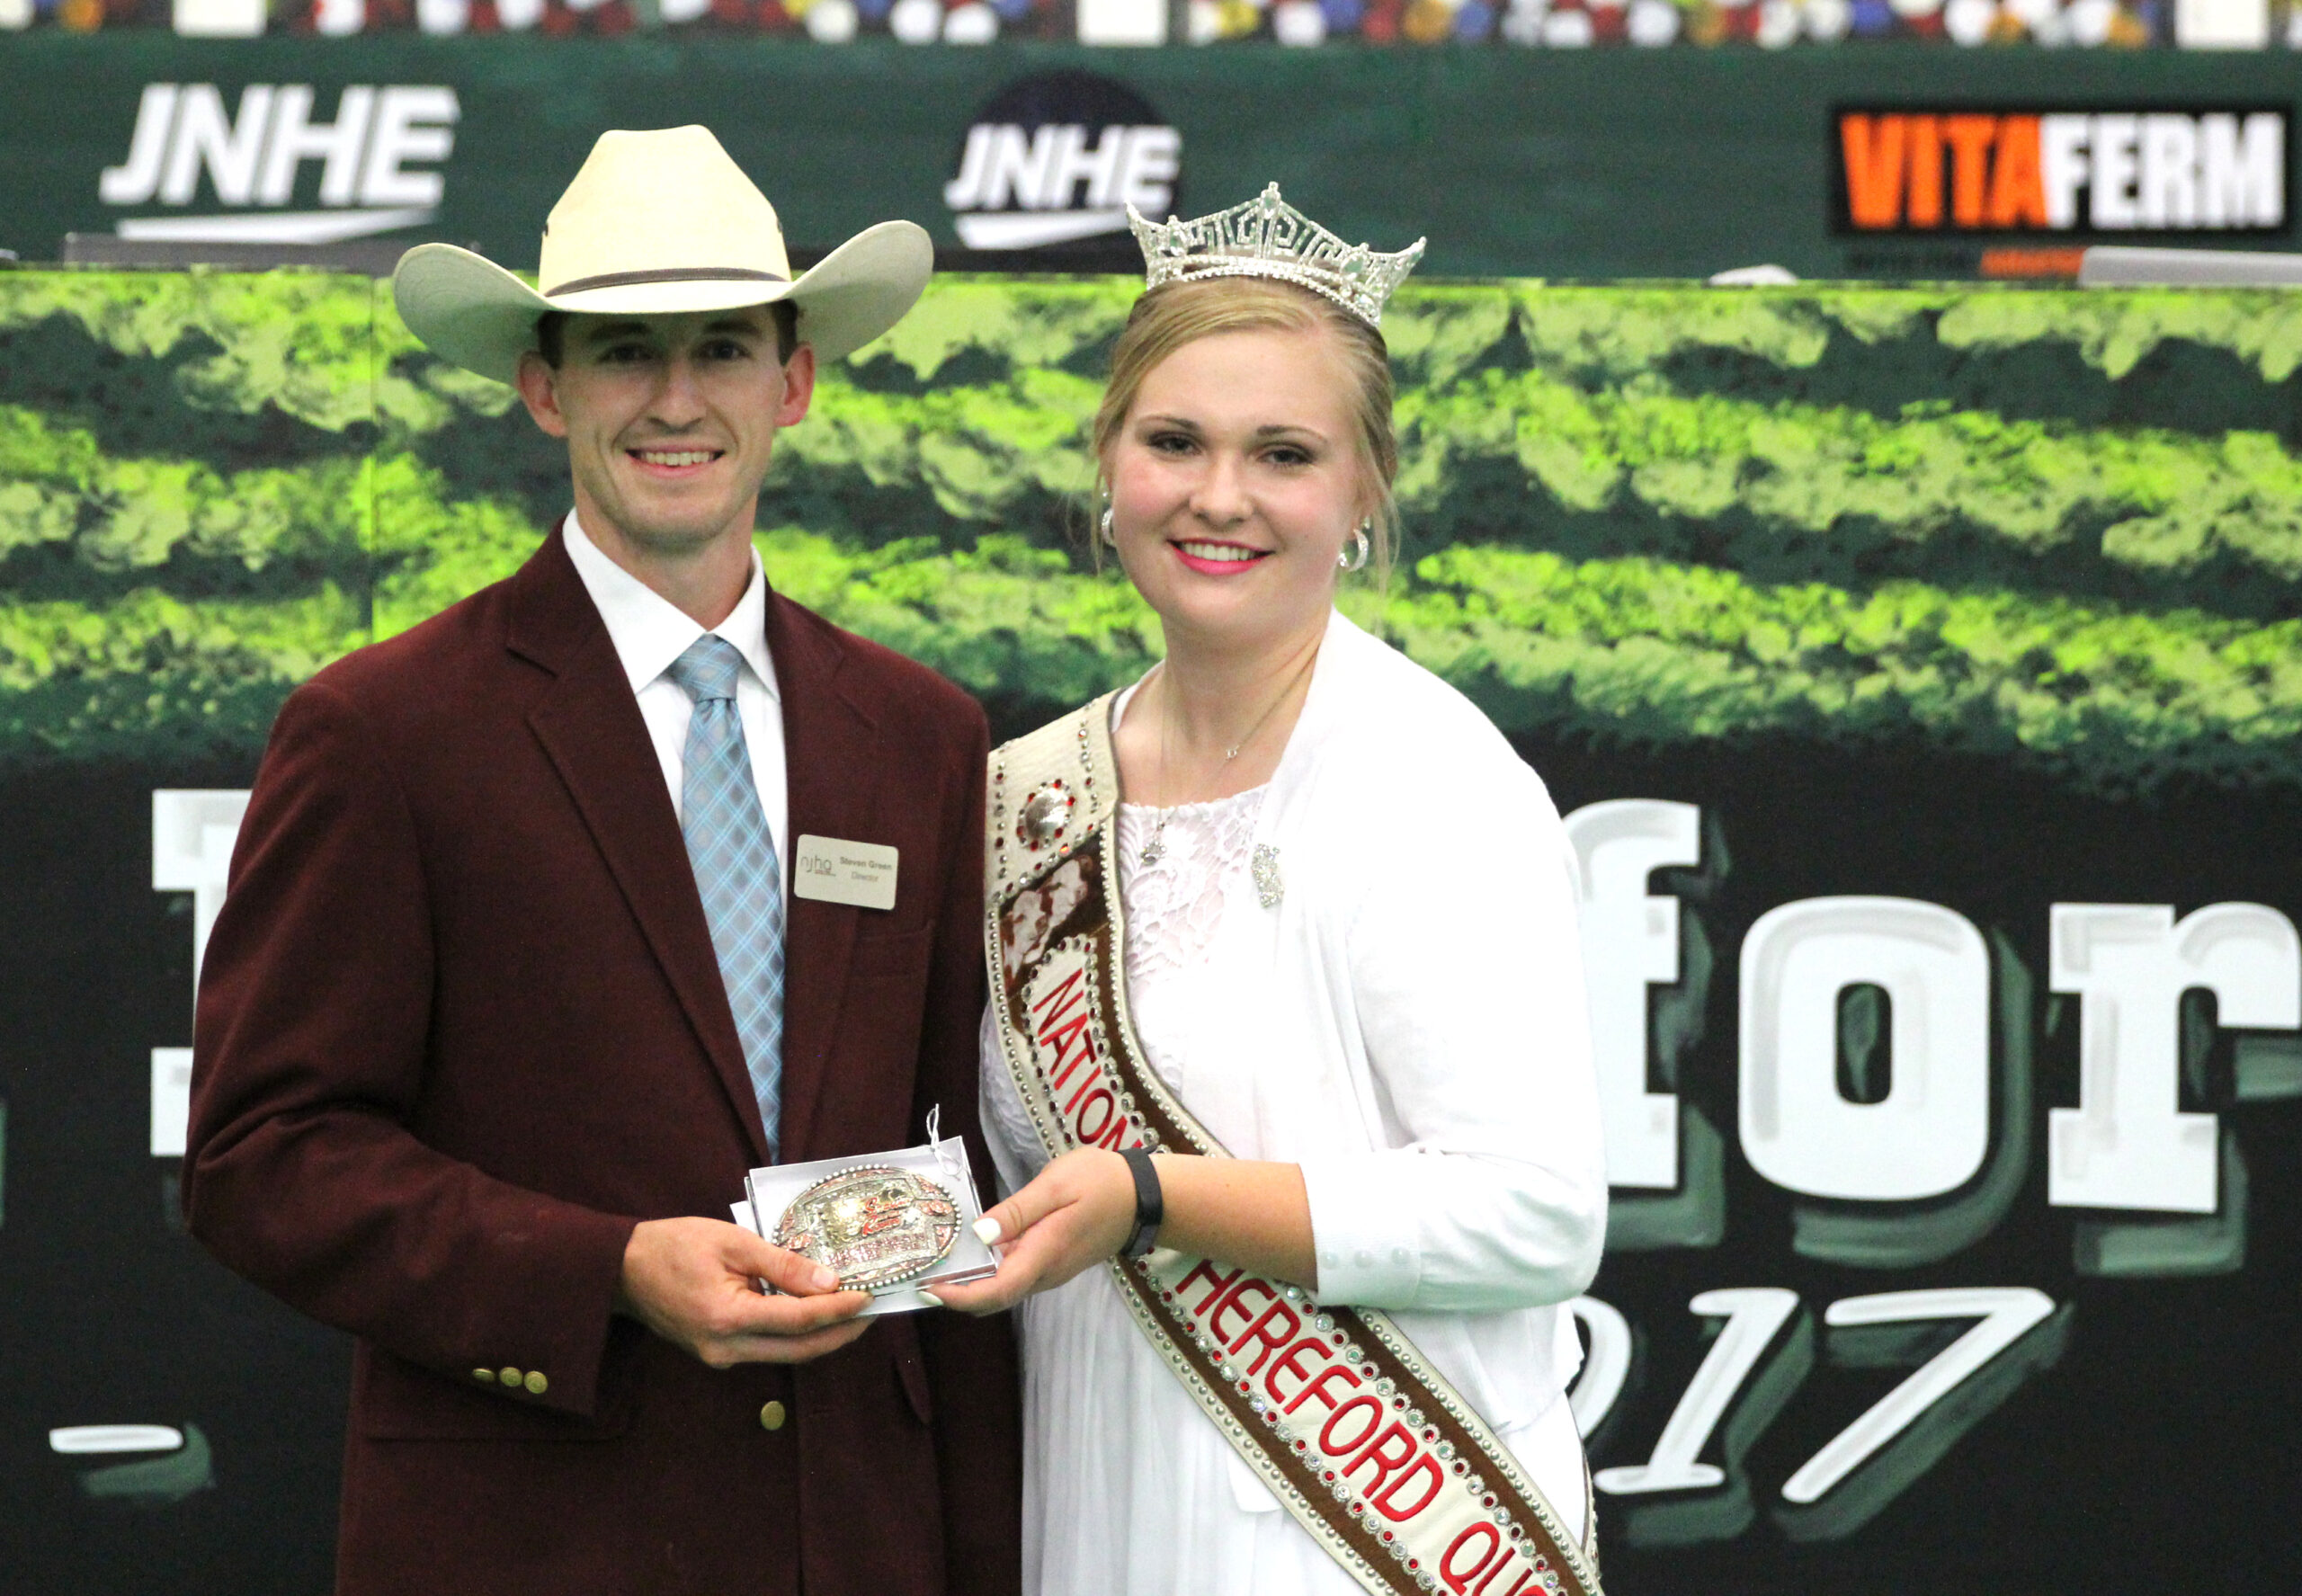 Green Named Hereford Junior Herdsman of the Year